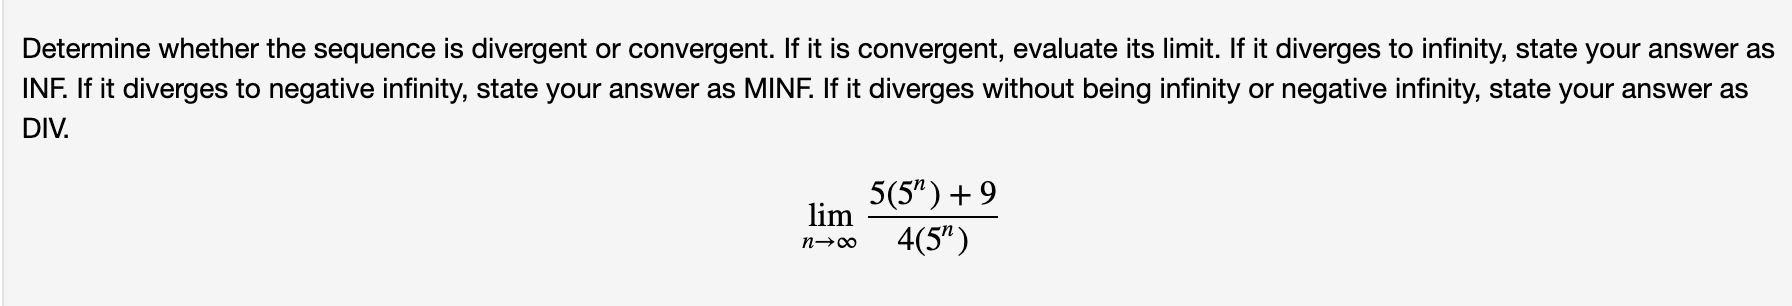 Determine whether the sequence is divergent or convergent. If it is convergent, evaluate its limit. If it diverges to infinity, state your answer as
INF. If it diverges to negative infinity, state your answer as MINF. If it diverges without being infinity or negative infinity, state your answer as
DIV.
5(5") +9
lim
4(5")
